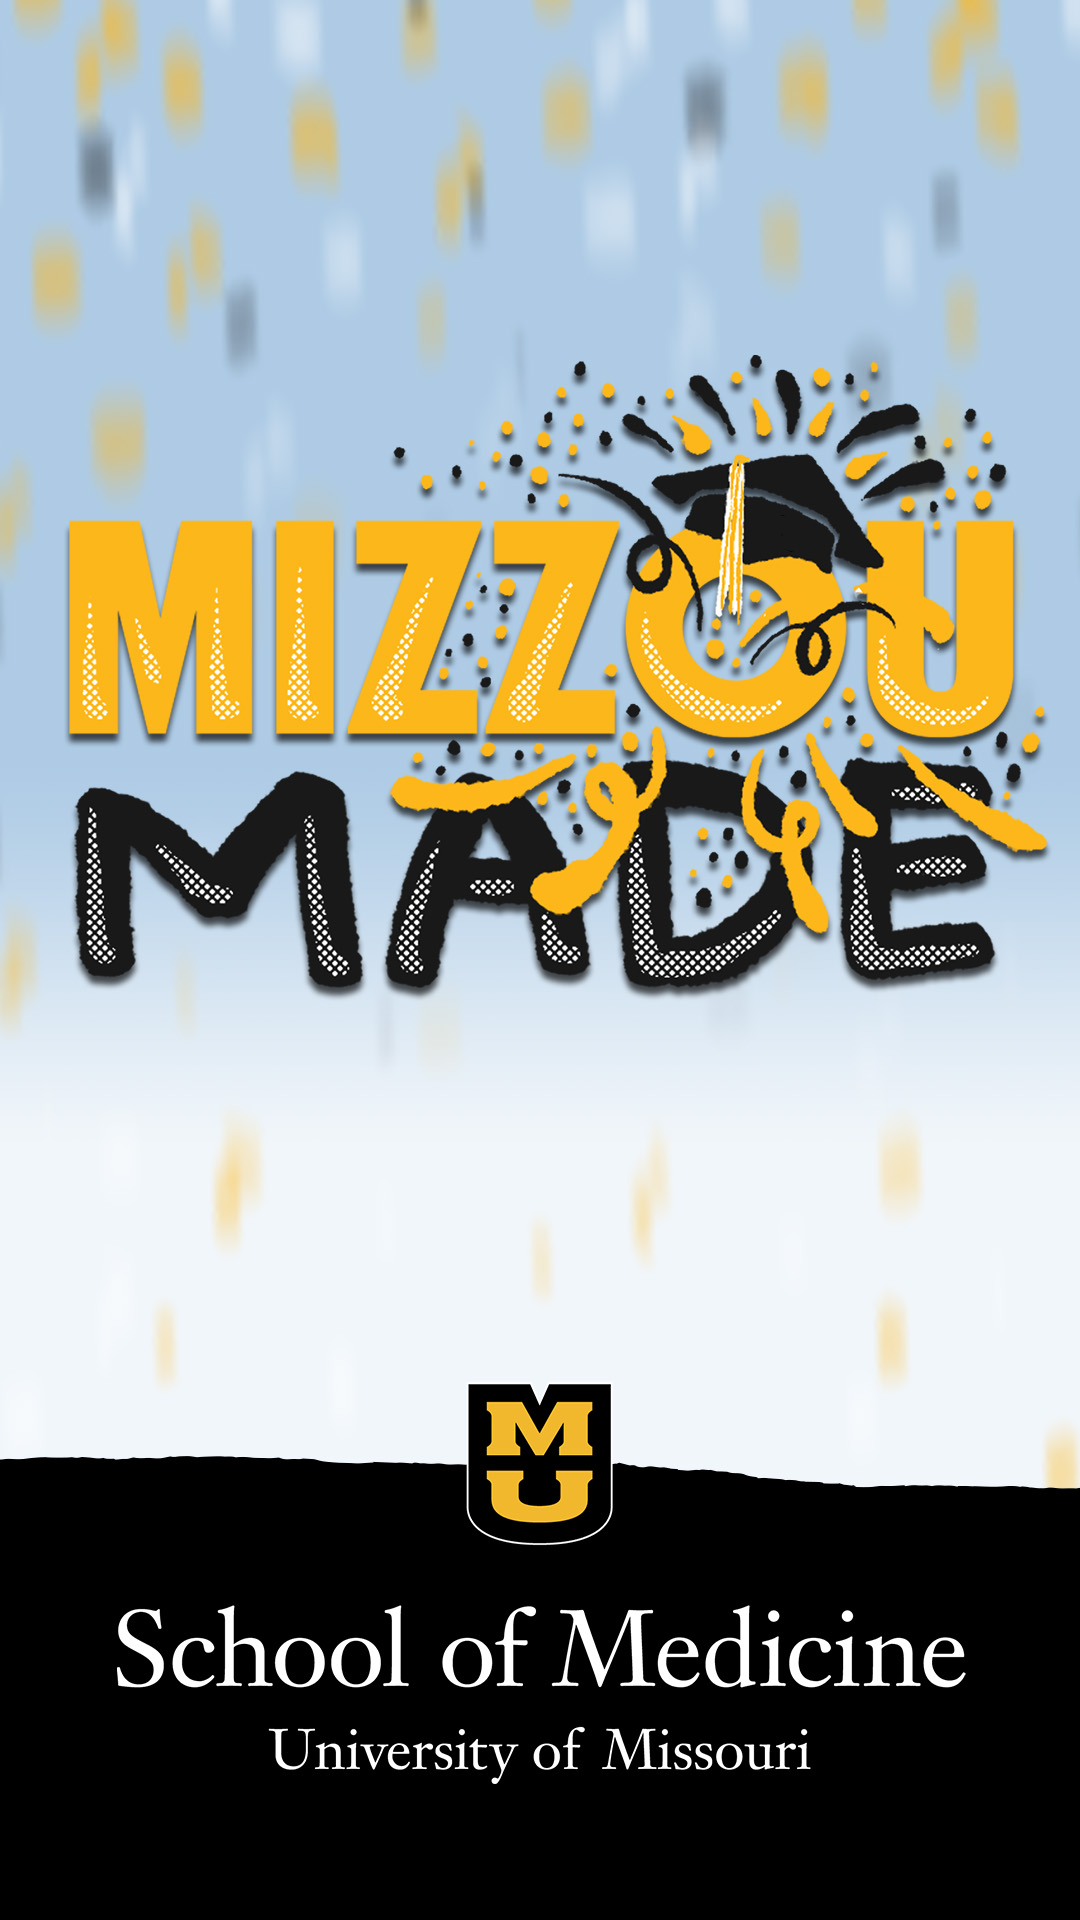 Light blue confetti background with a hand drawn gold bubble “Mizzou” and black “Made” stacked underneath it. The 'o' in the Mizzou has a graduation cap with confetti shooting out. The bottom half looks like a ripped black page with a small gold stacked MU logo and the words 